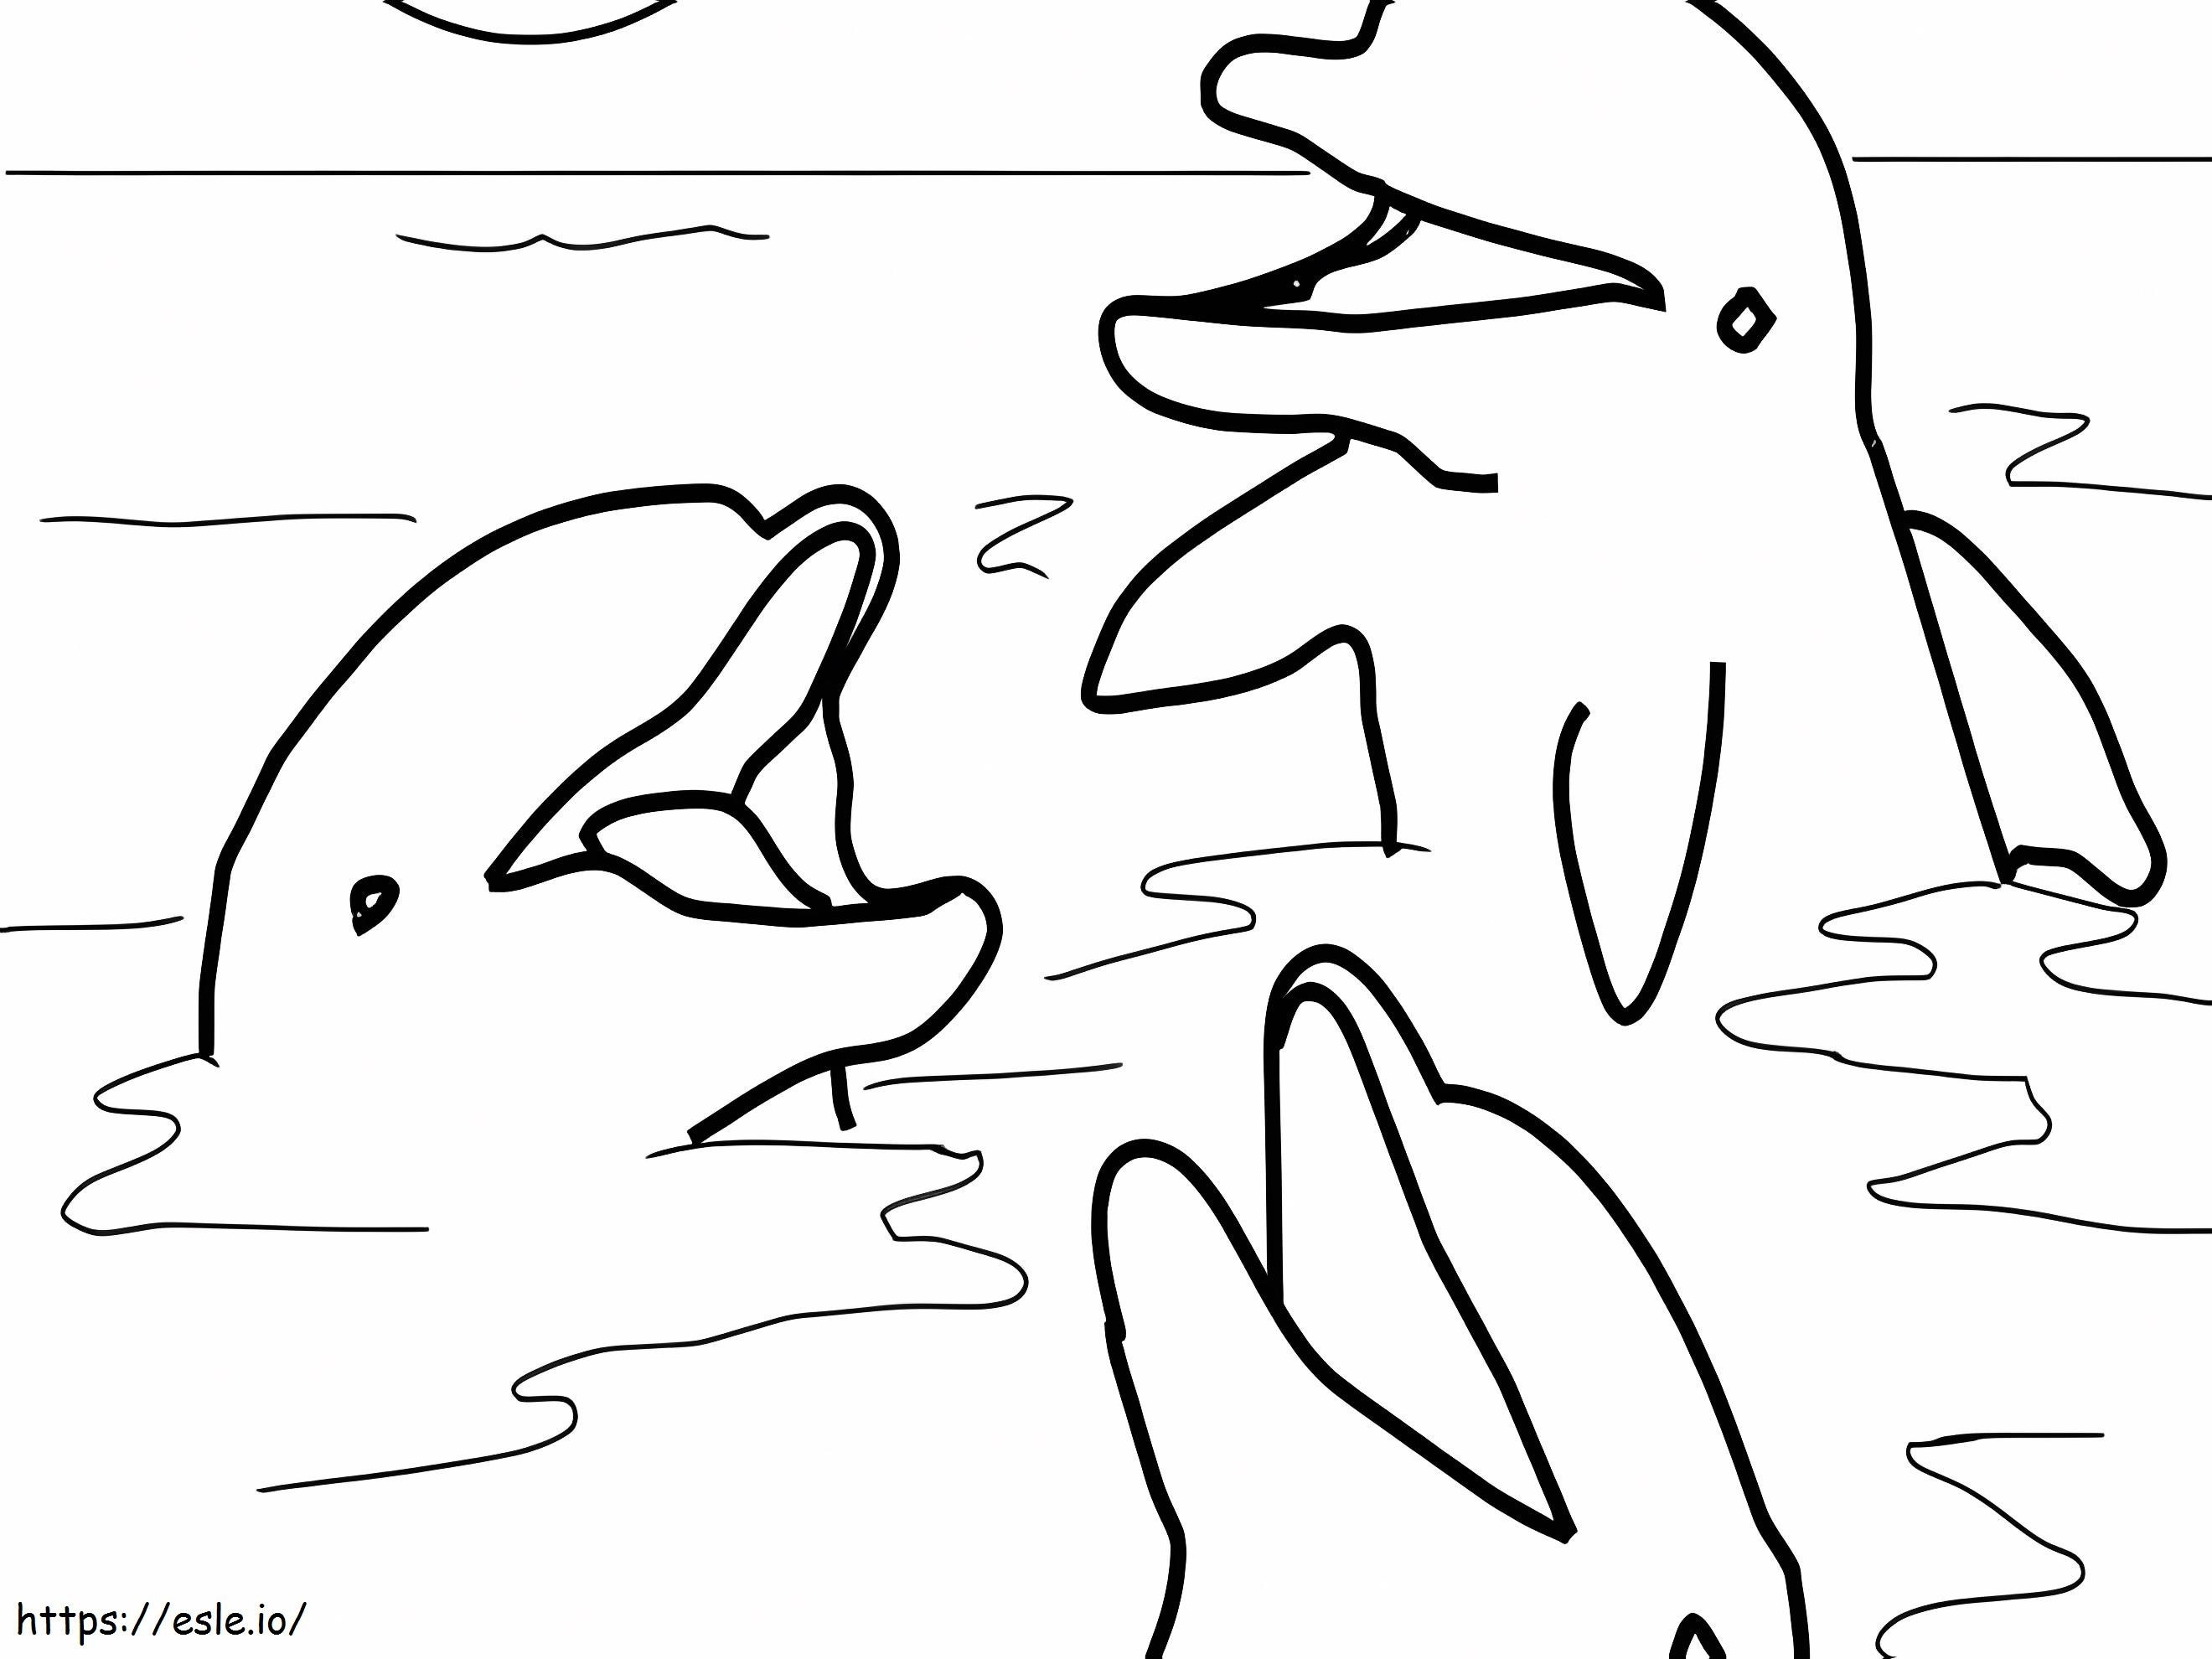 Happy Three Dolphins coloring page